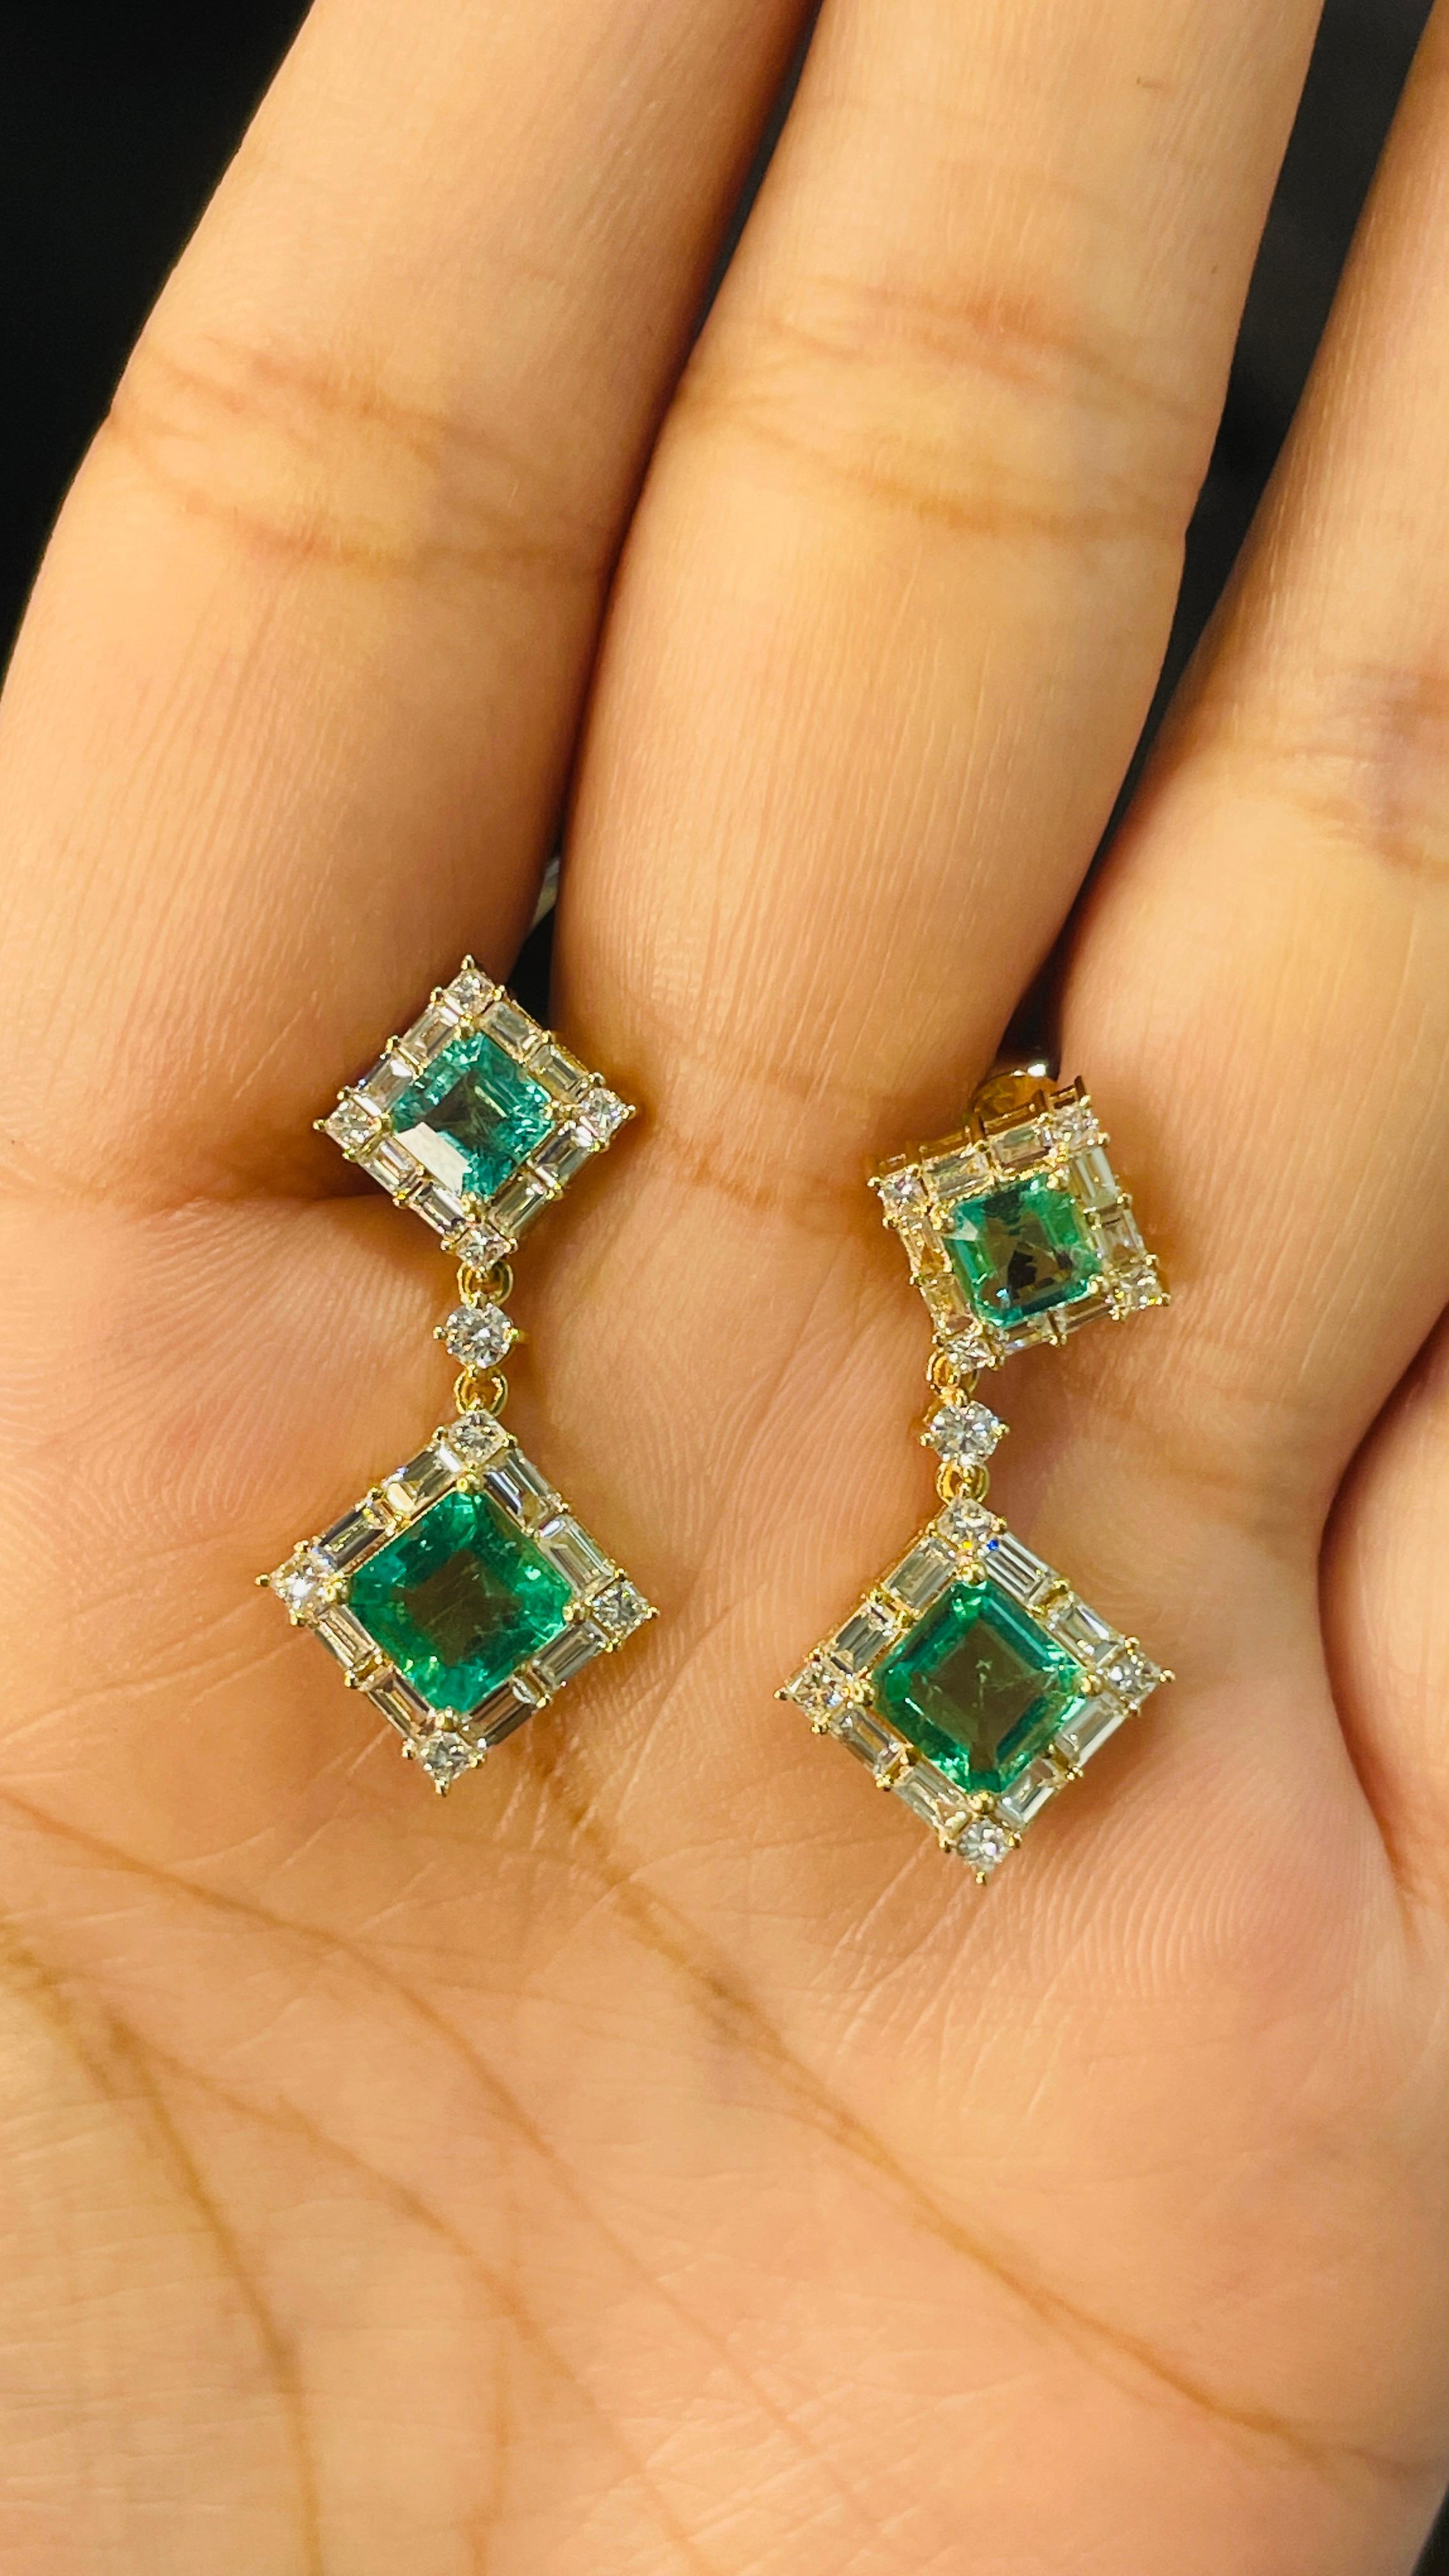 Emerald Dangle earrings to make a statement with your look. These earrings create a sparkling, luxurious look featuring octagon cut gemstone.
If you love to gravitate towards unique styles, this piece of jewelry is perfect for you.

PRODUCT DETAILS